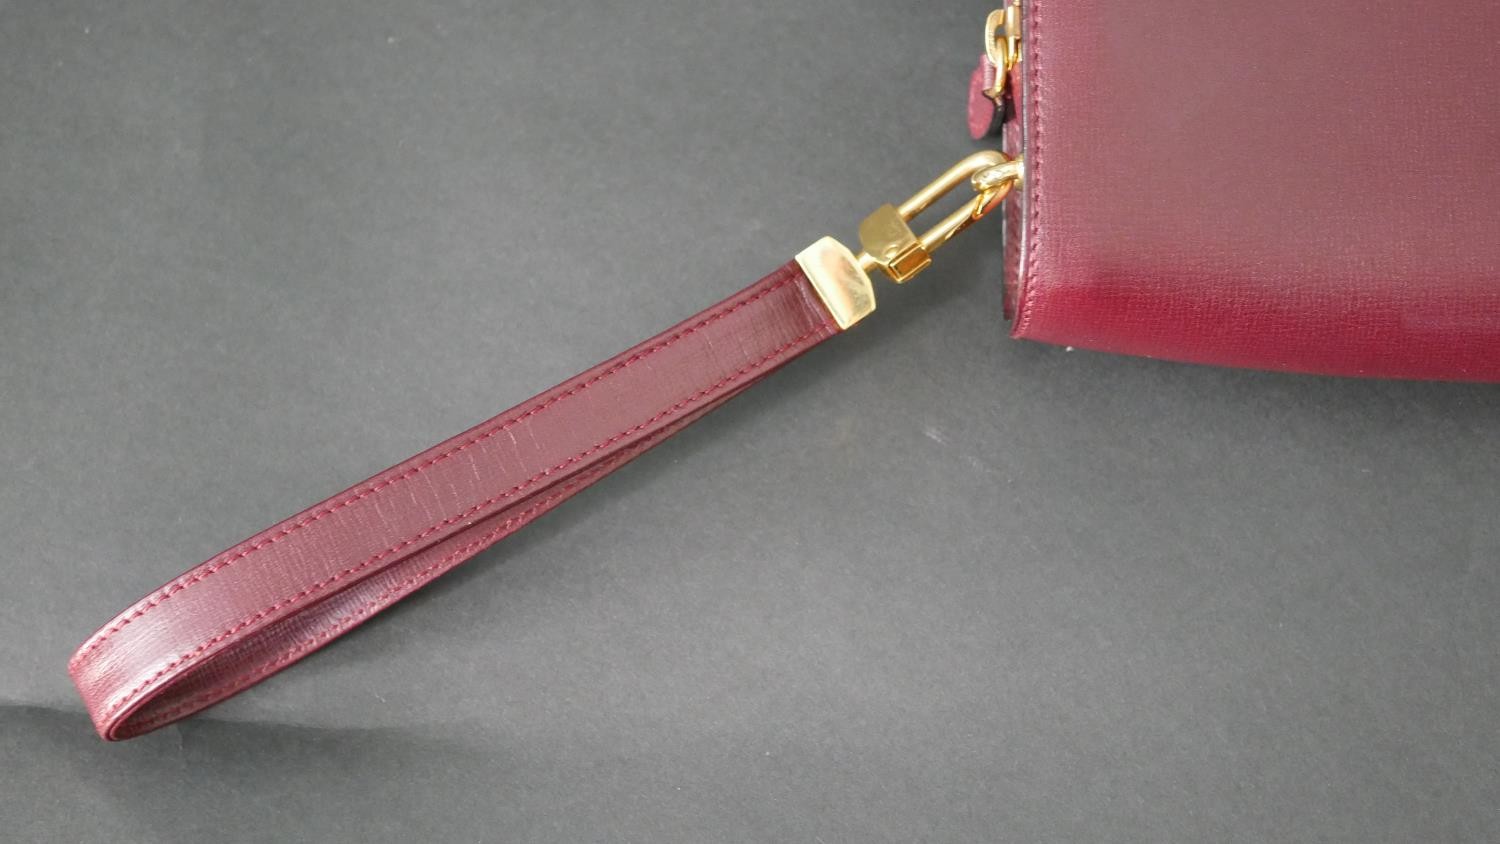 A leather Cartier clutch bag with red silk interior with Cartier writing and raised Cartier monogram - Image 3 of 9